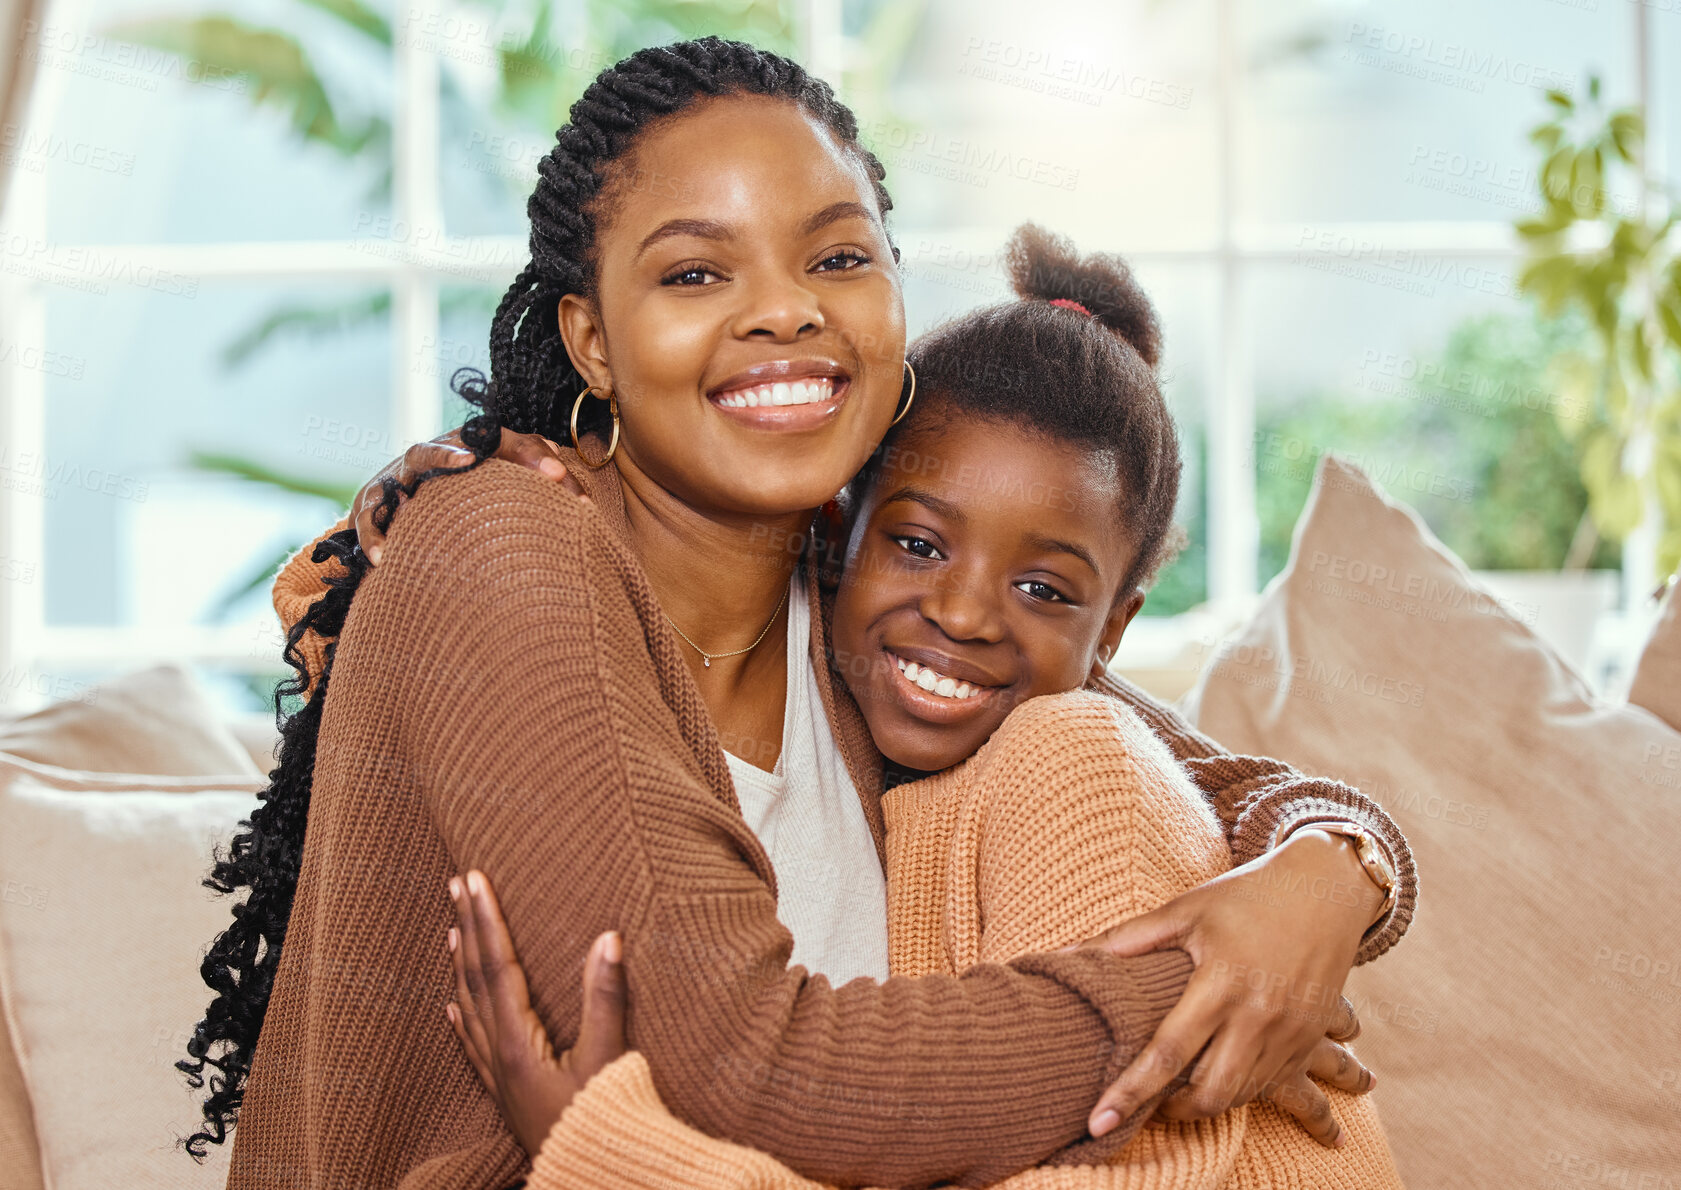 Buy stock photo Shot of a young mother hugging her daughter